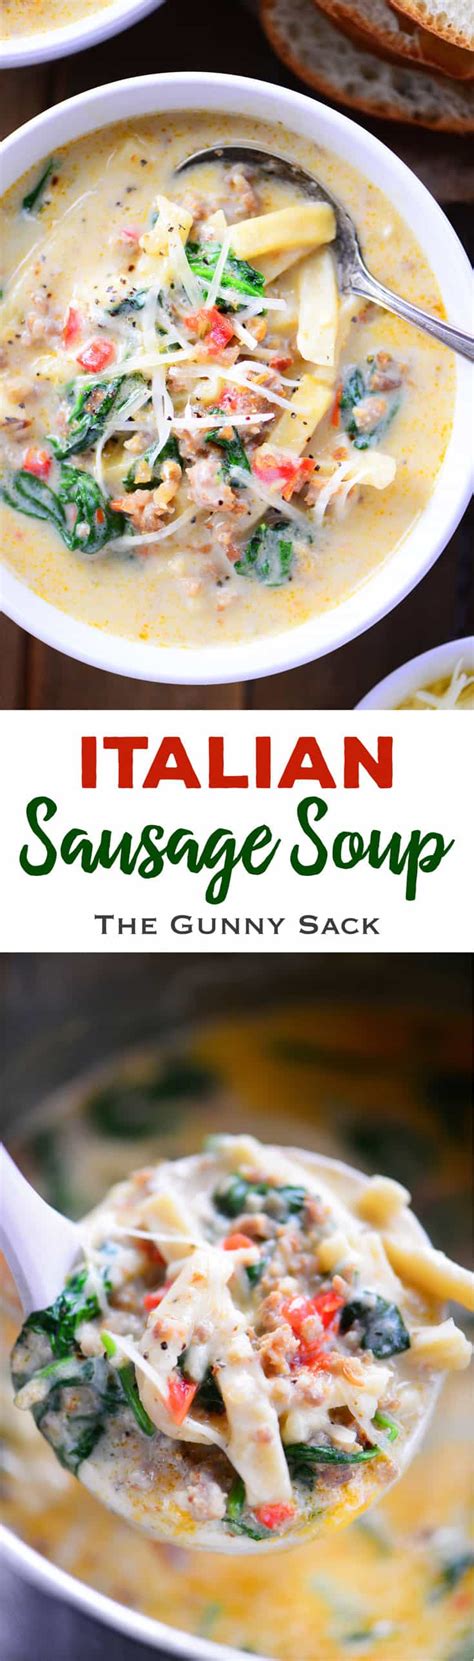 This commission helps to support our blog, so we can continue to offer our readers free recipes and home project ideas! Italian Sausage Soup Recipe - The Gunny Sack